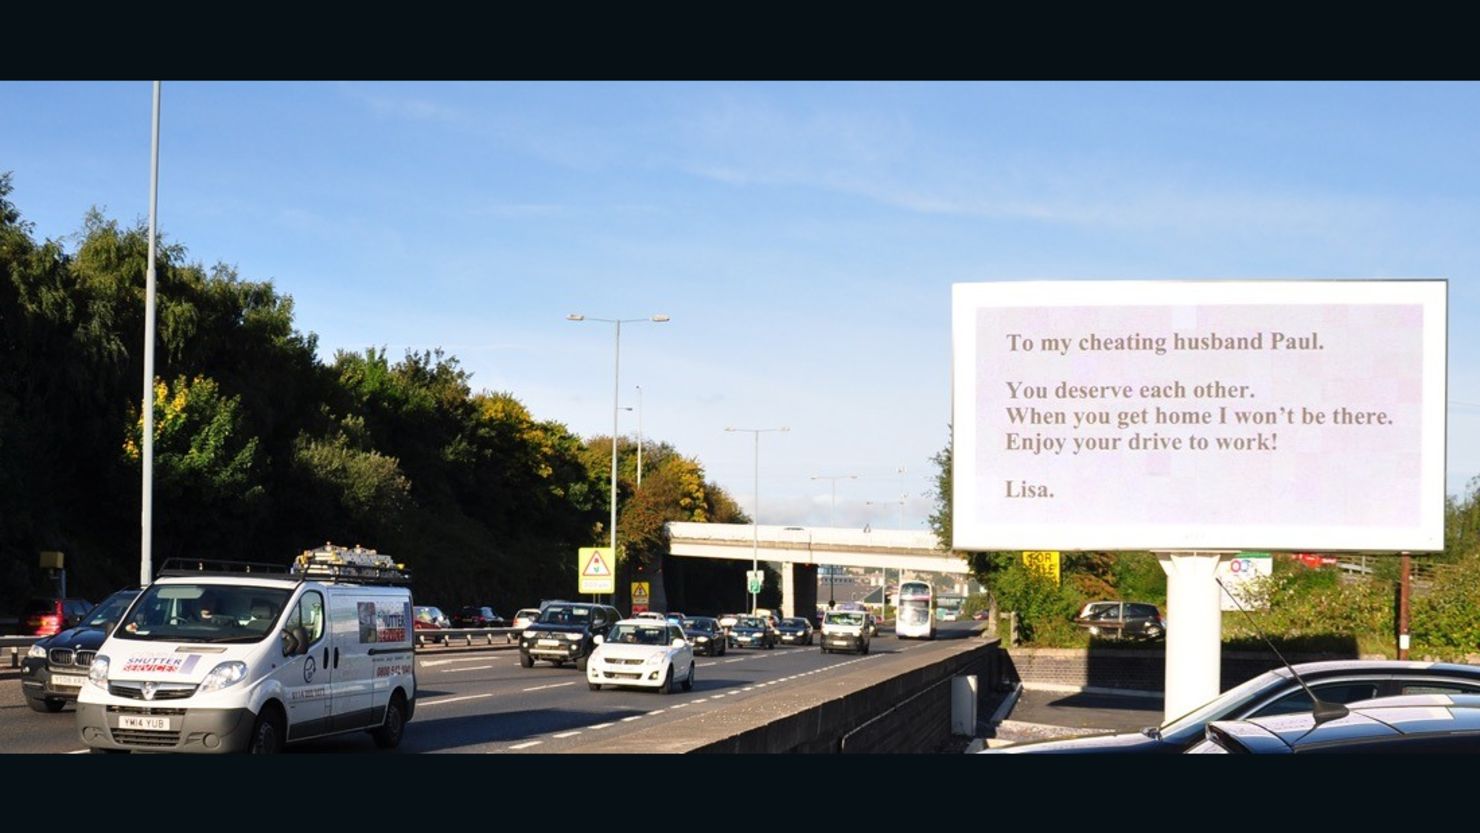 The hard hitting billboard sign was positioned alongside a busy highway in Sheffield, northern England.